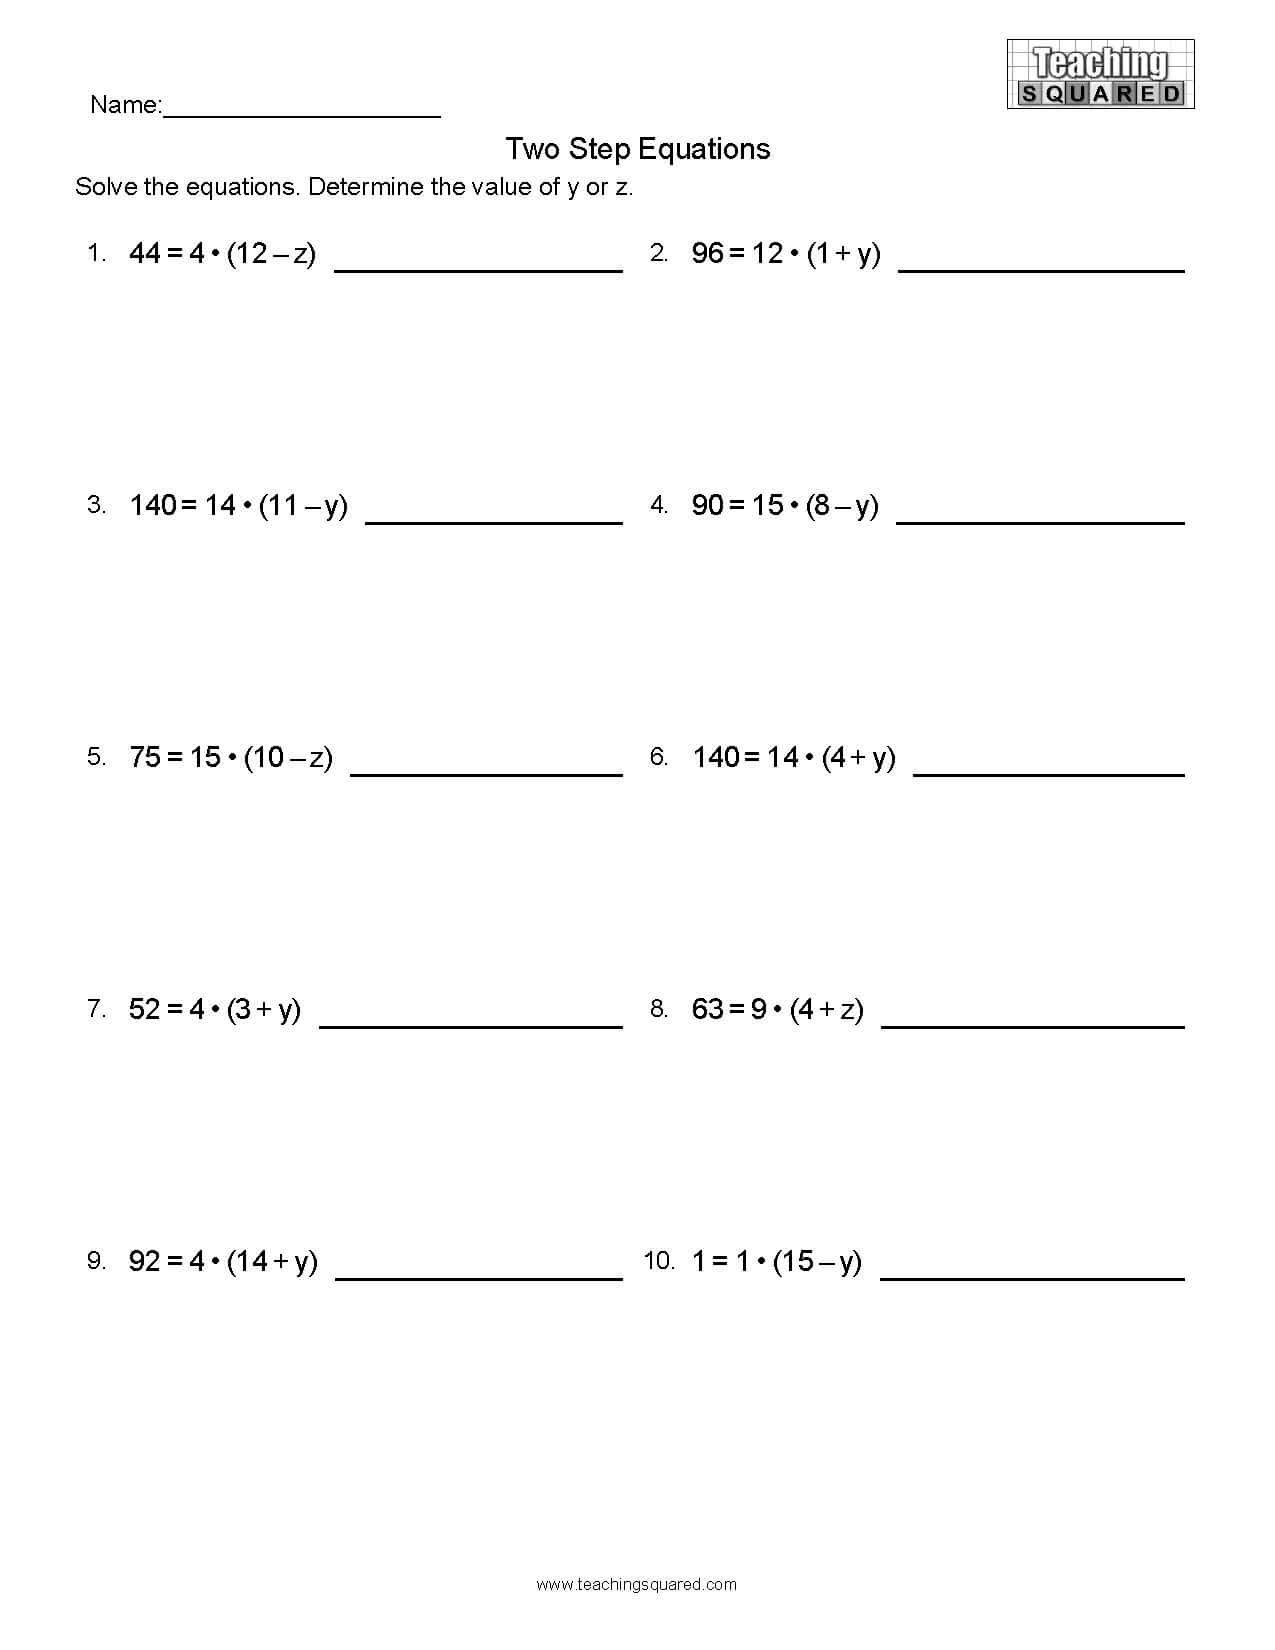 Two Step Equation Worksheet Equations Parenthesis R1 Teaching Squared